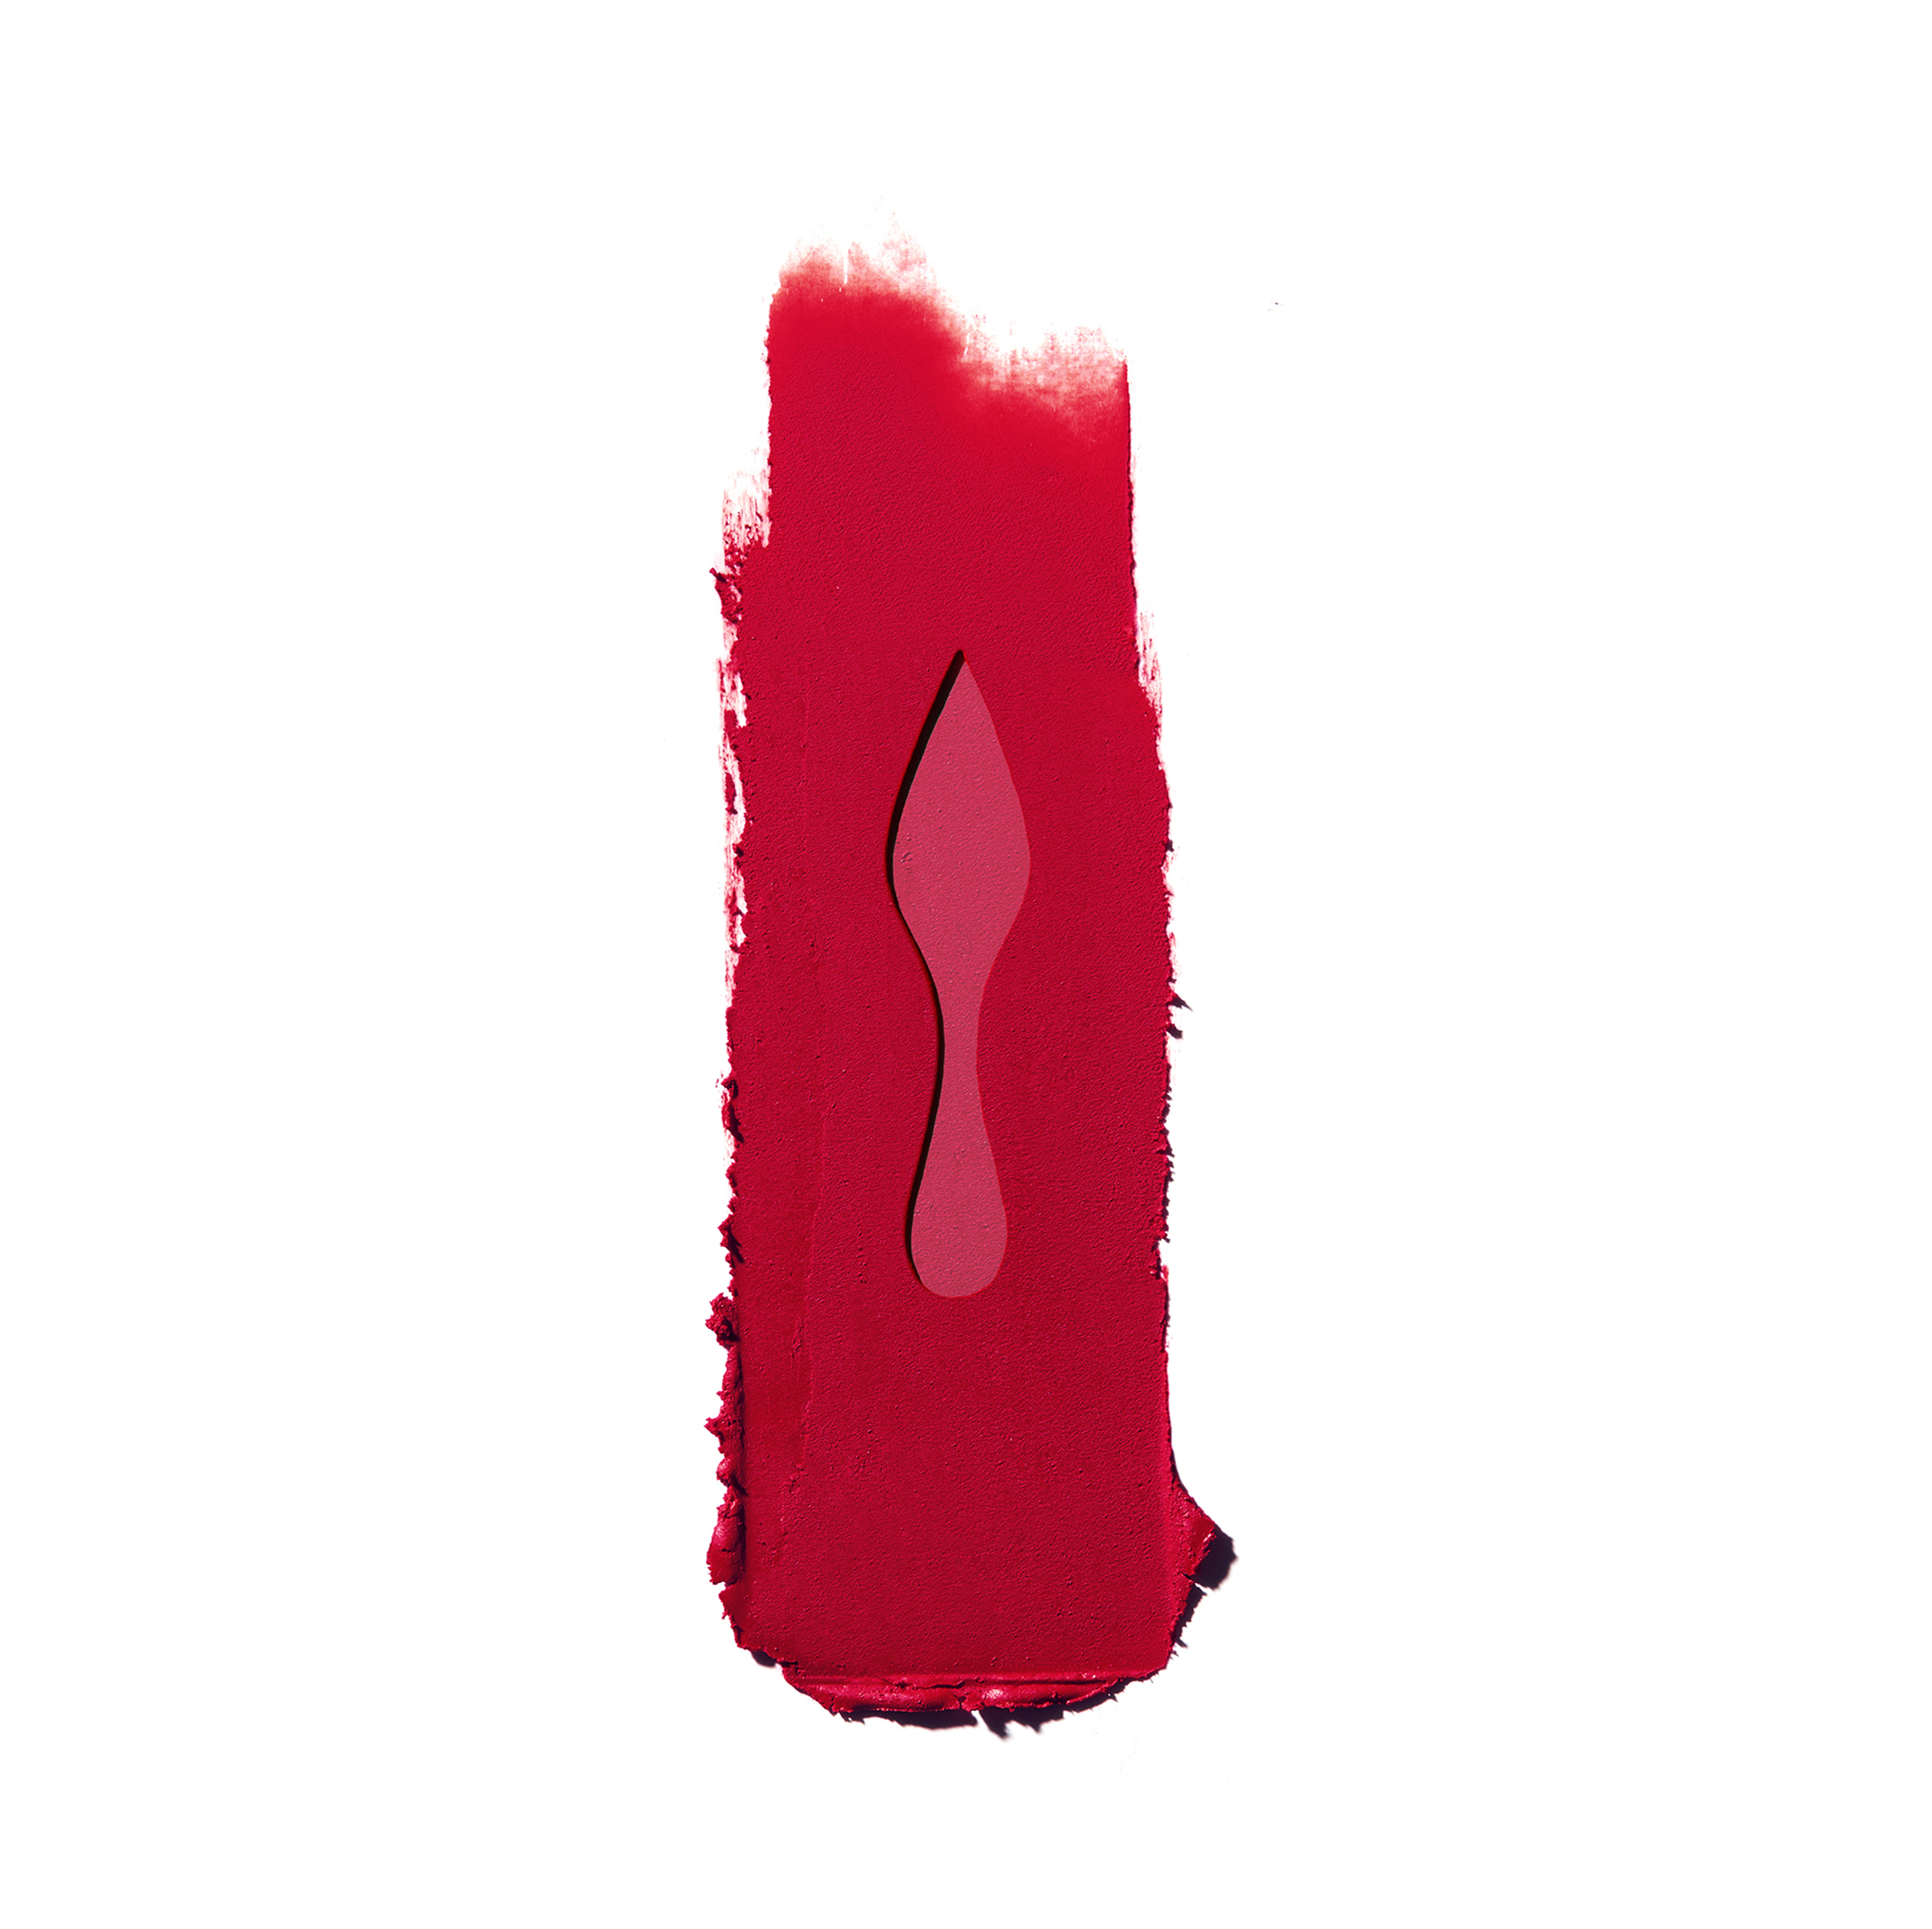 Pack of 10 Christian Louboutin Rouge Silky Satin Lip Colour 001 Card Sample